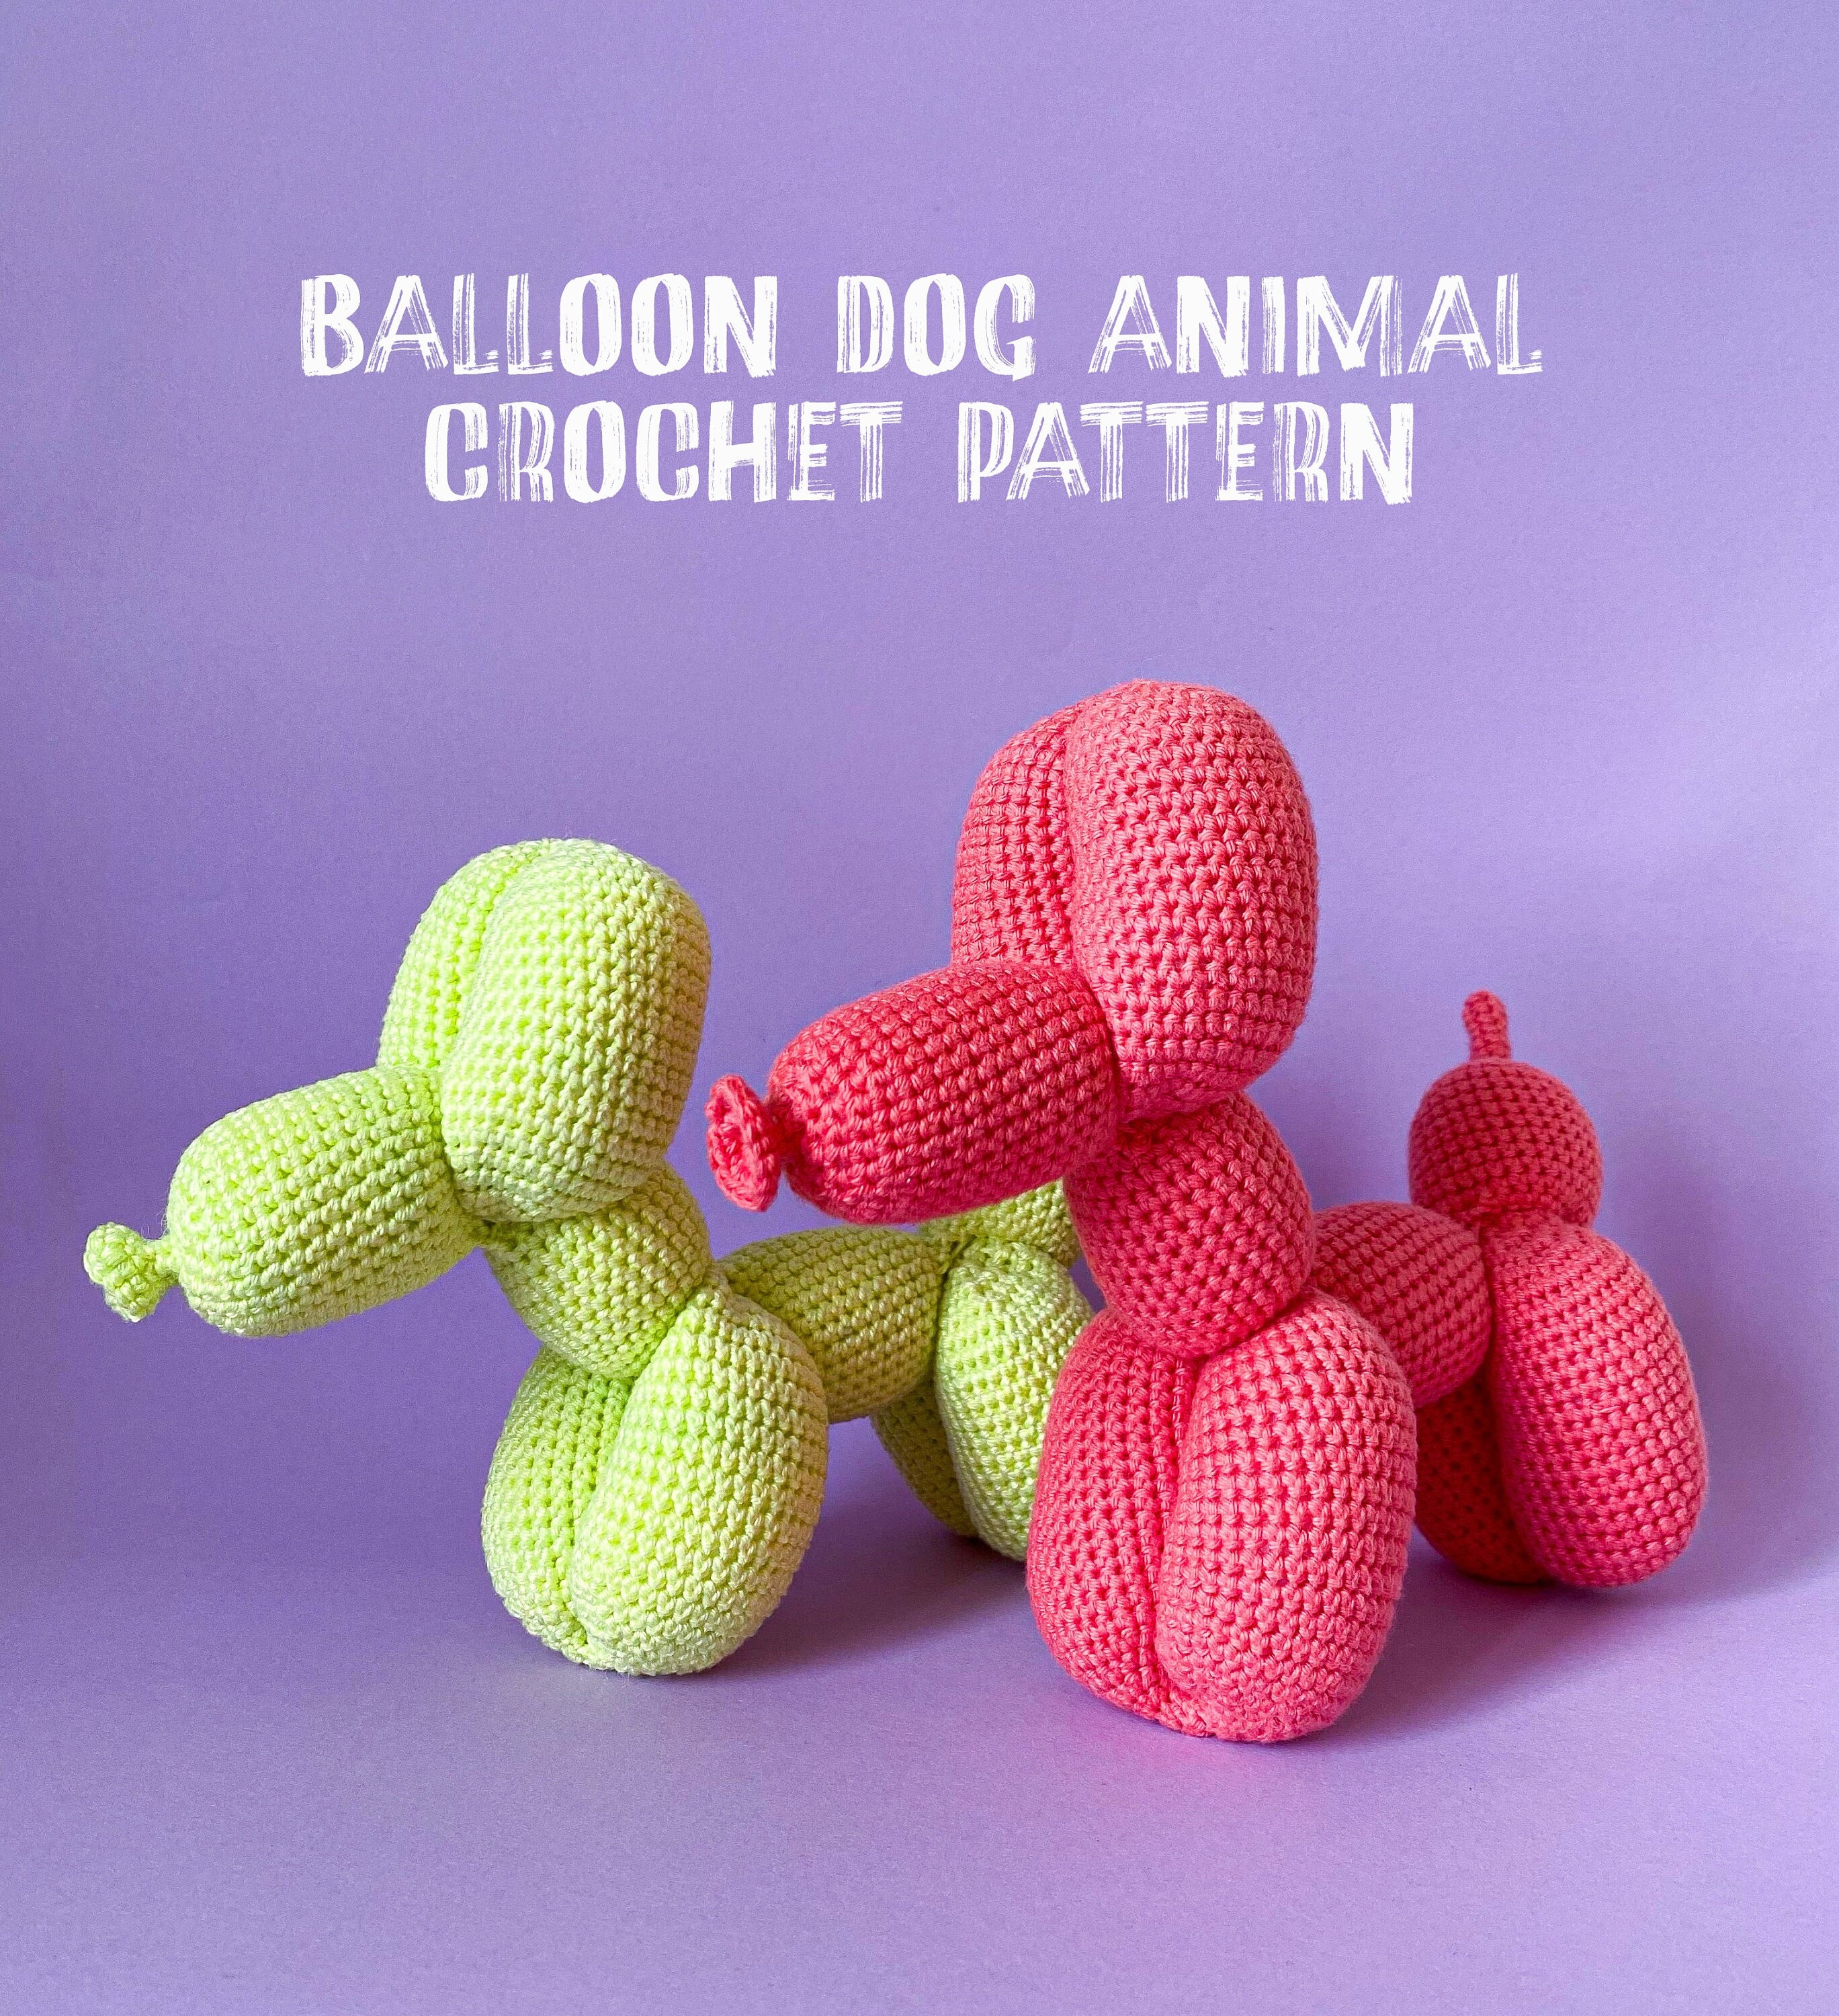  46 Pieces Dog Themed Balloons Include 40 Pieces Dog